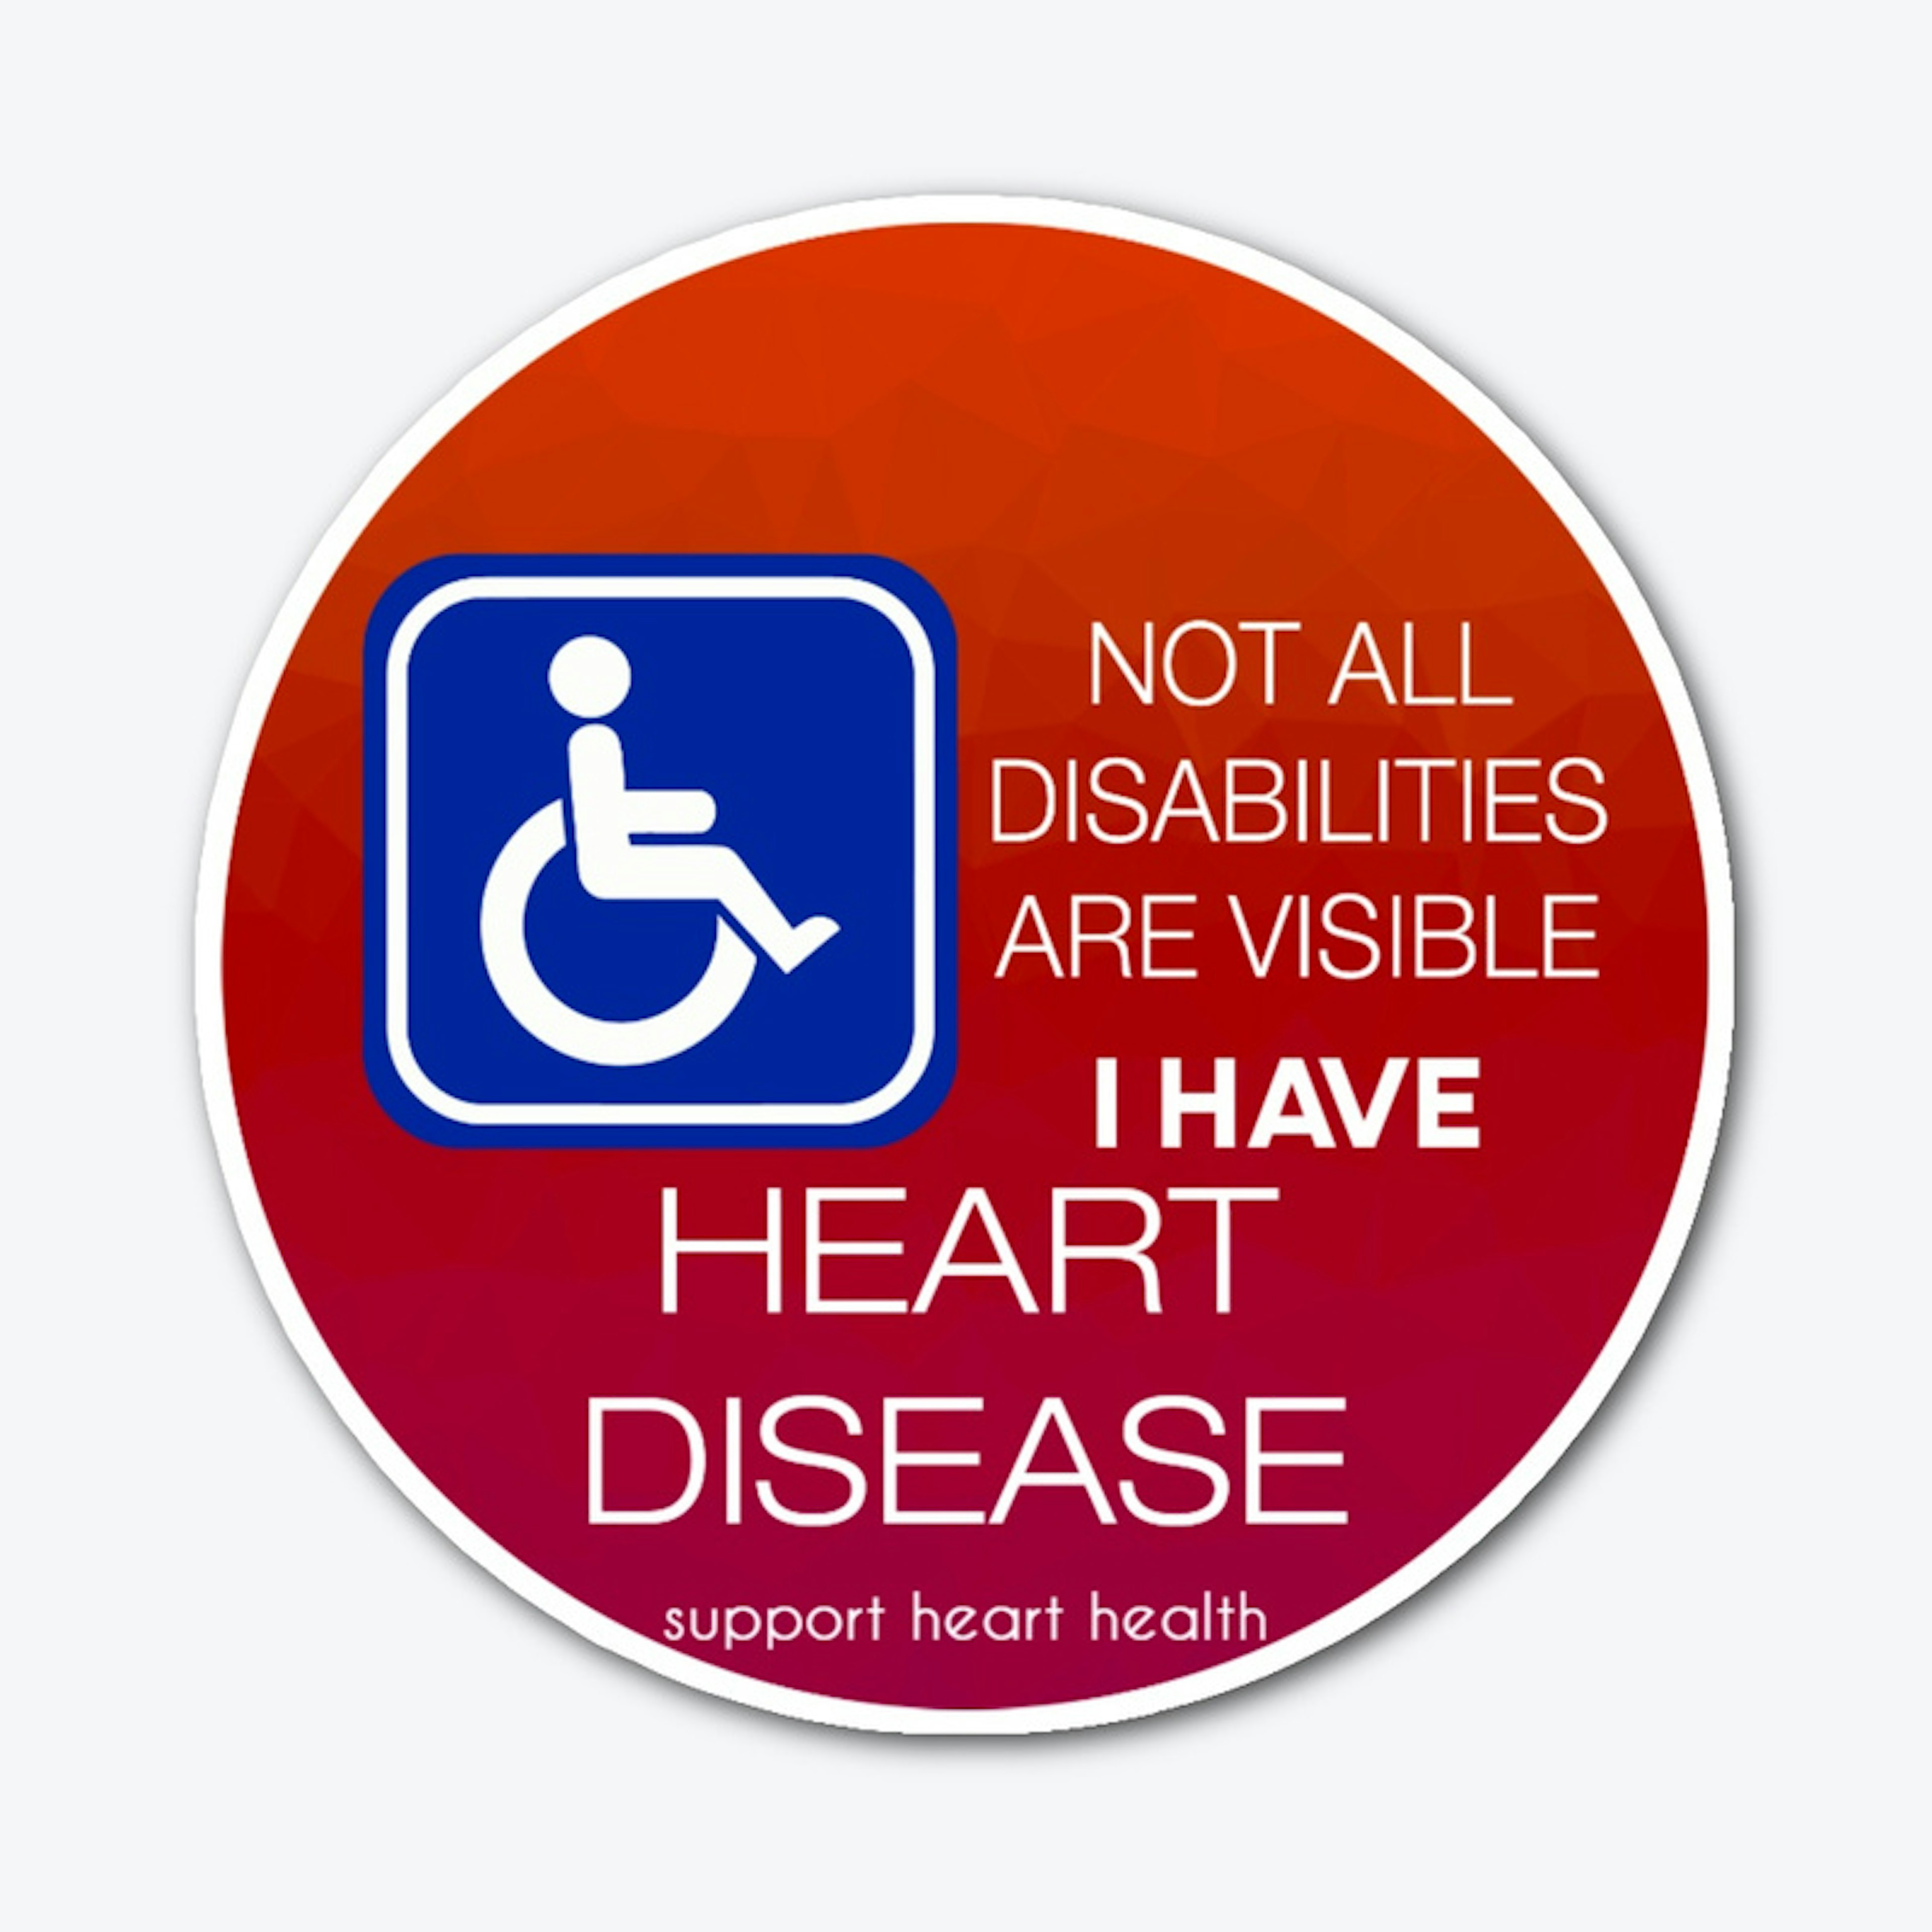 Disability Sticker for heart patient